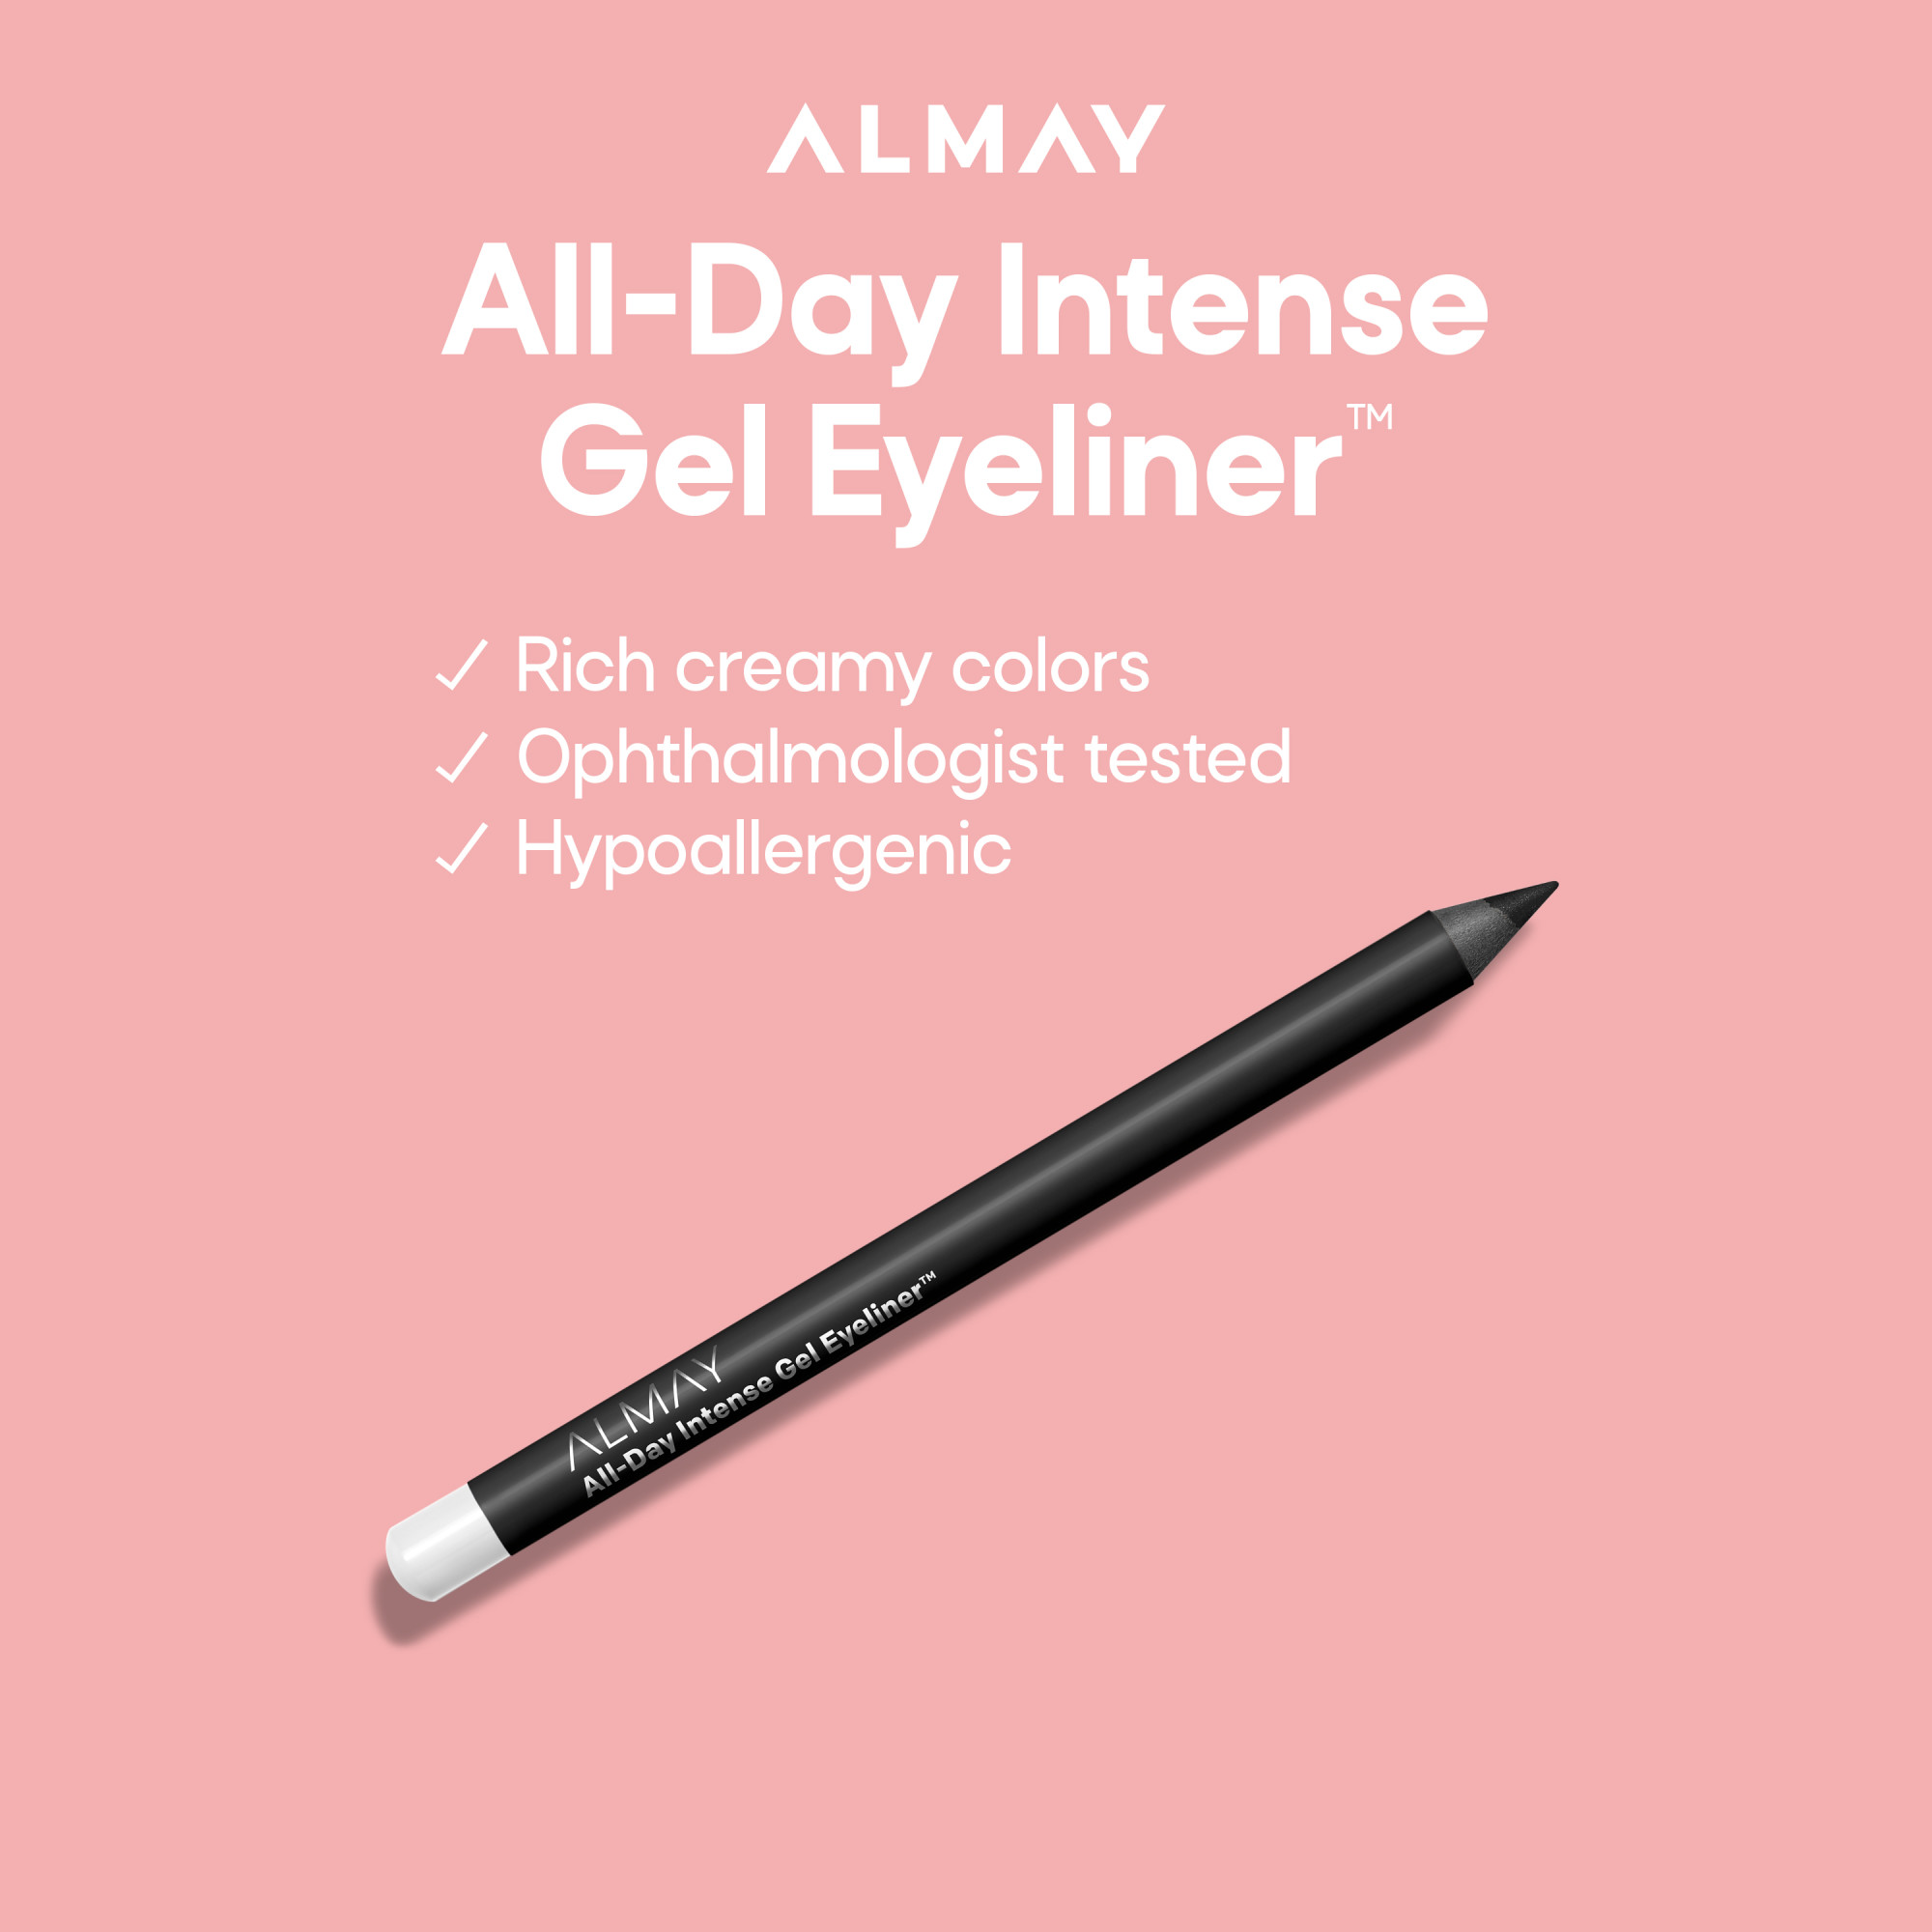 Almay All-Day Intense Gel Eyeliner, Longlasting, Waterproof, Fade-Proof Creamy High-Performing Easy-to-Sharpen Liner Pencil, 150 Evergreen, 0.028 oz. - image 5 of 17